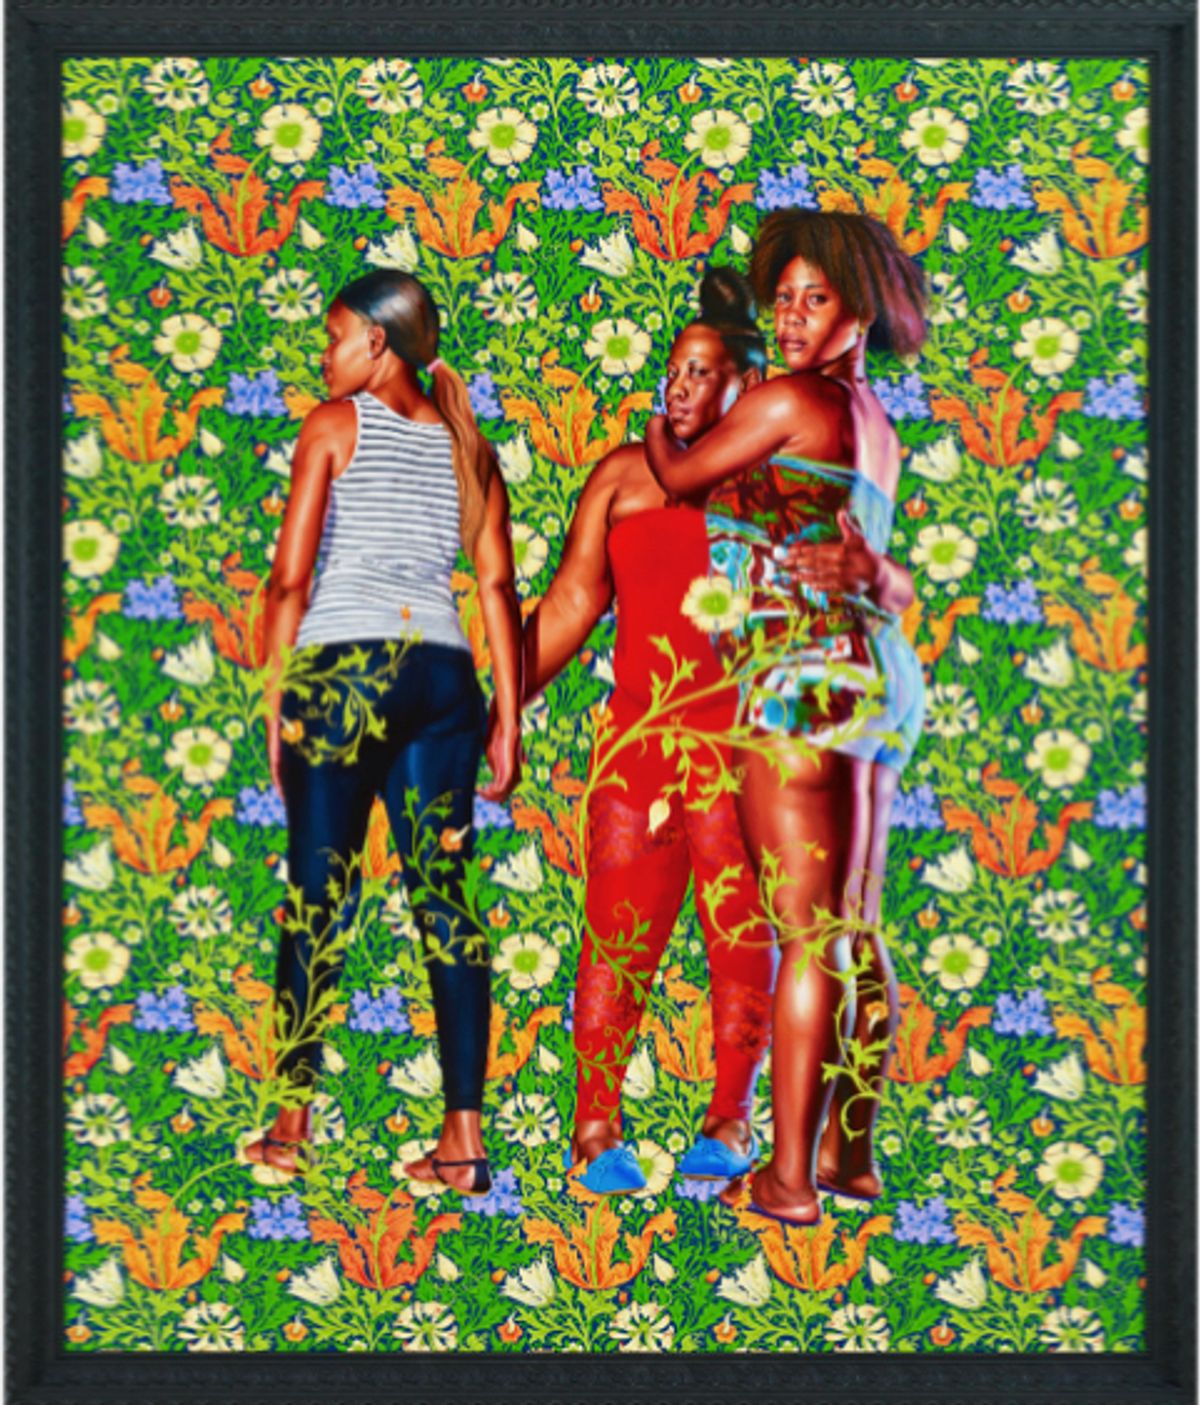 Naomi and Her Daughters (2013), Kehinde Wiley © 2019 Kehinde Wiley Courtesy of Stephen Friedman Gallery